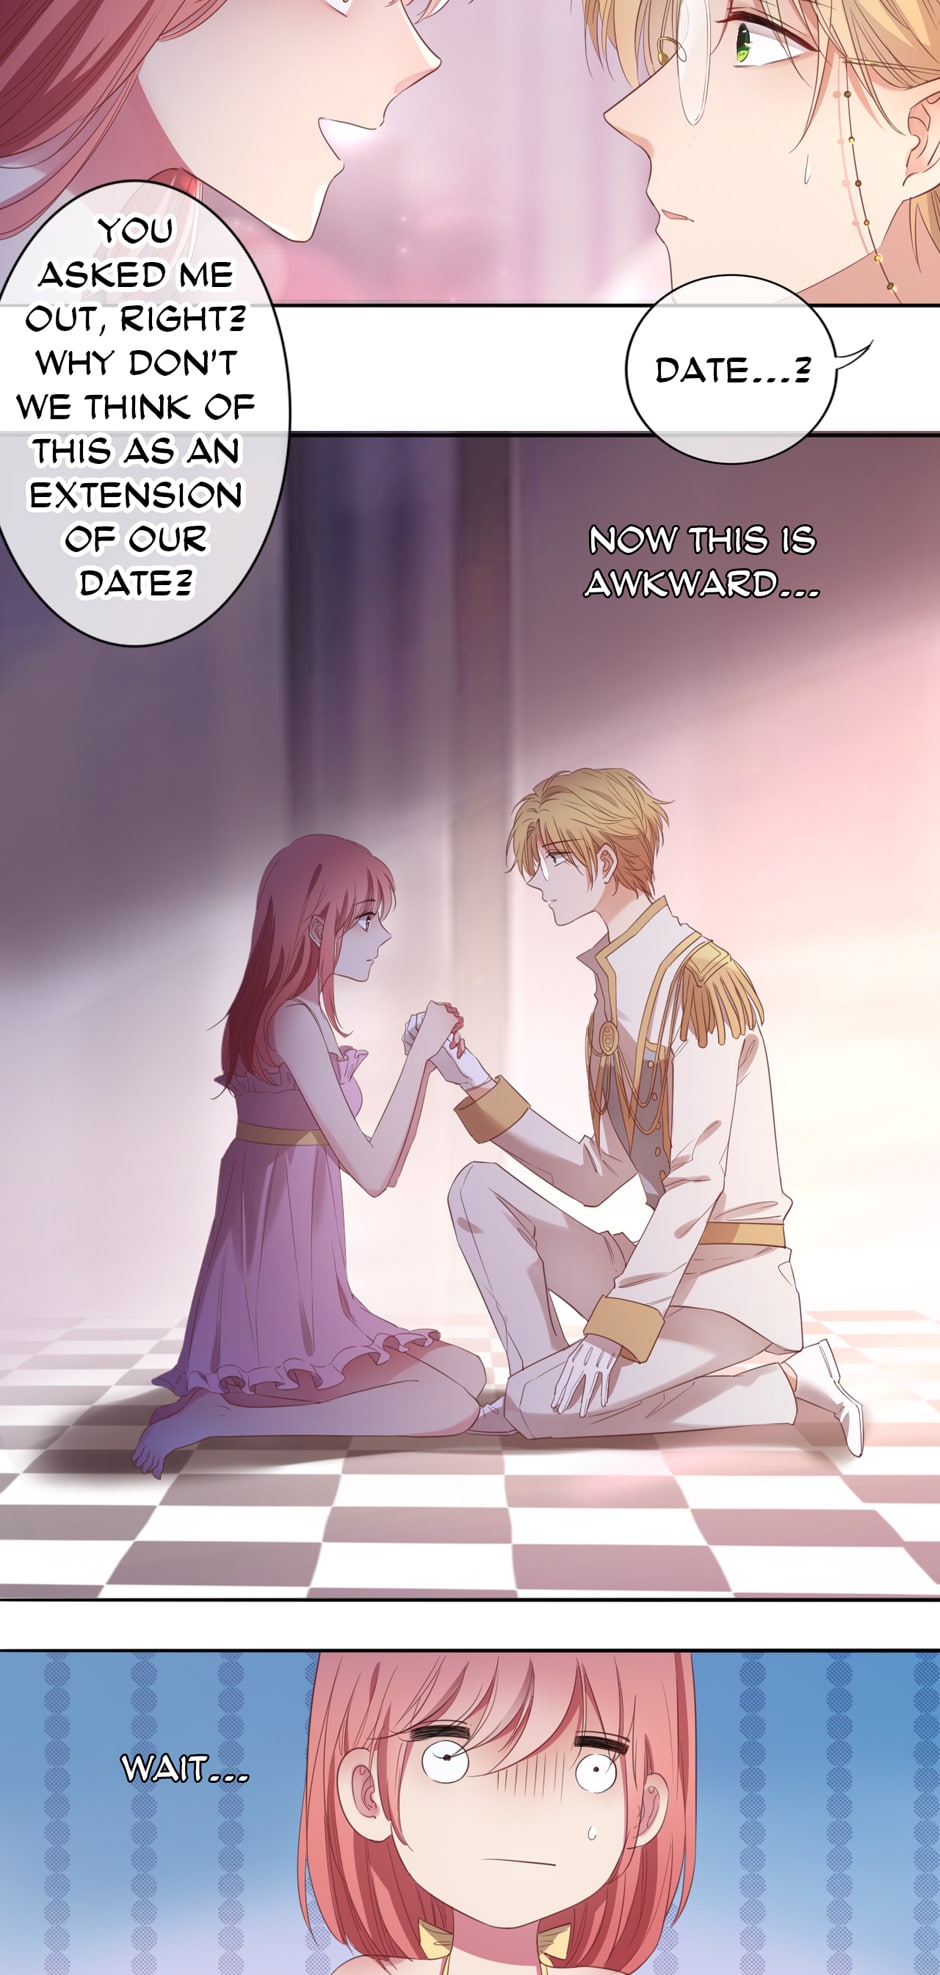 The Queen's Knights Ch.21